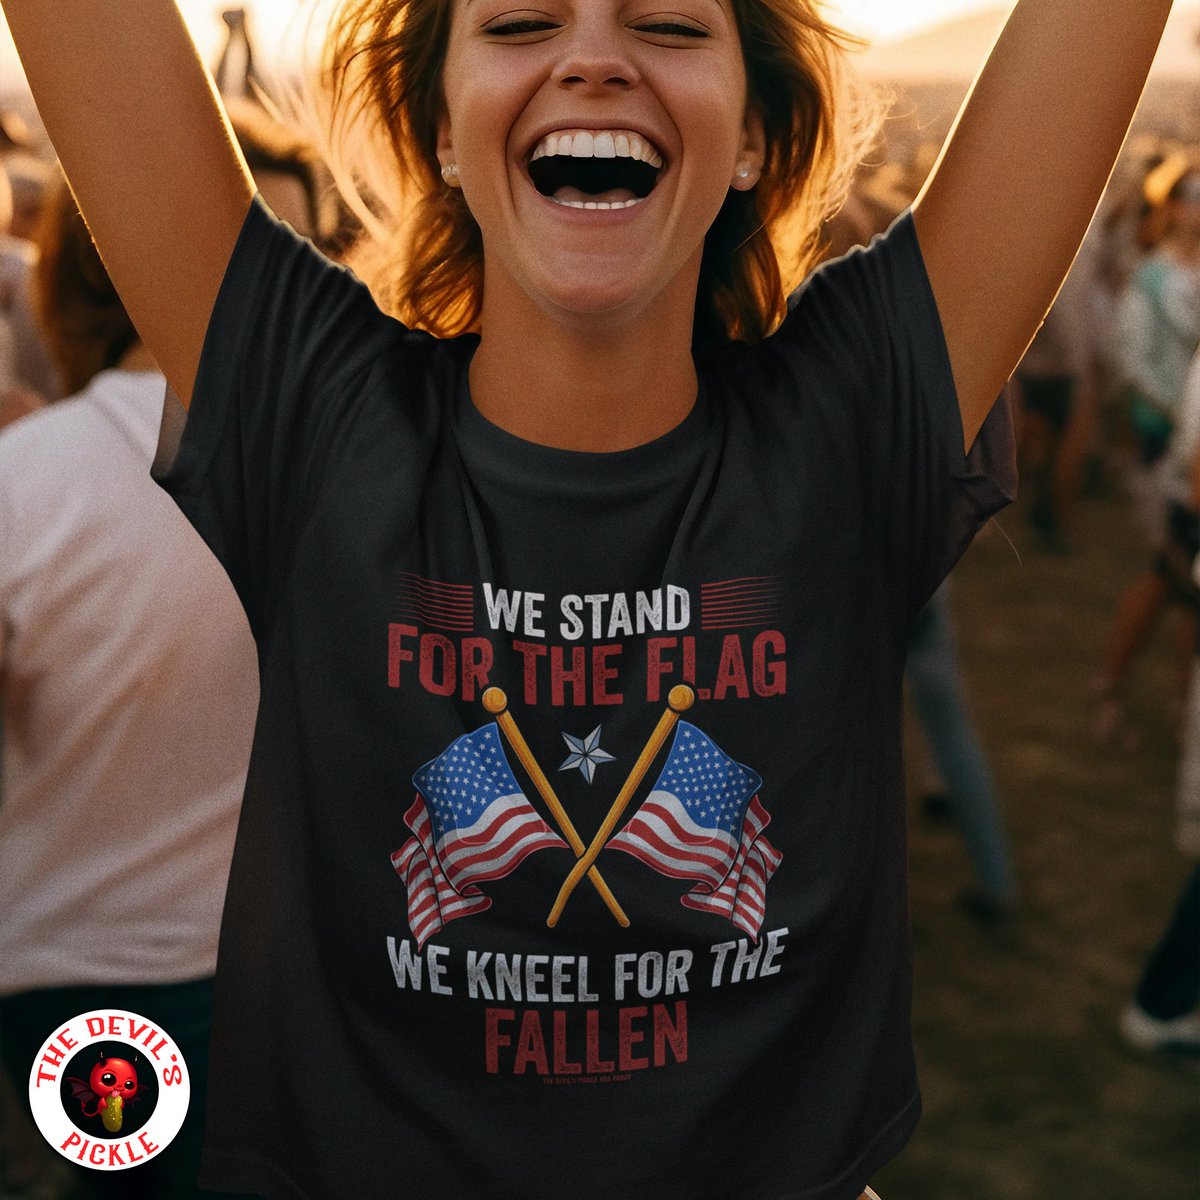 Standing tall for what we believe in, kneeling in honor of those who sacrificed it all. The Best Patriotic and American Tees, Hoodies and Sweatshirts.

#WeStandForTheFlag #freeshipping #americanpride #proudtobeanamerican #2ndamendment #hellyeahamerica #ProudAmerican